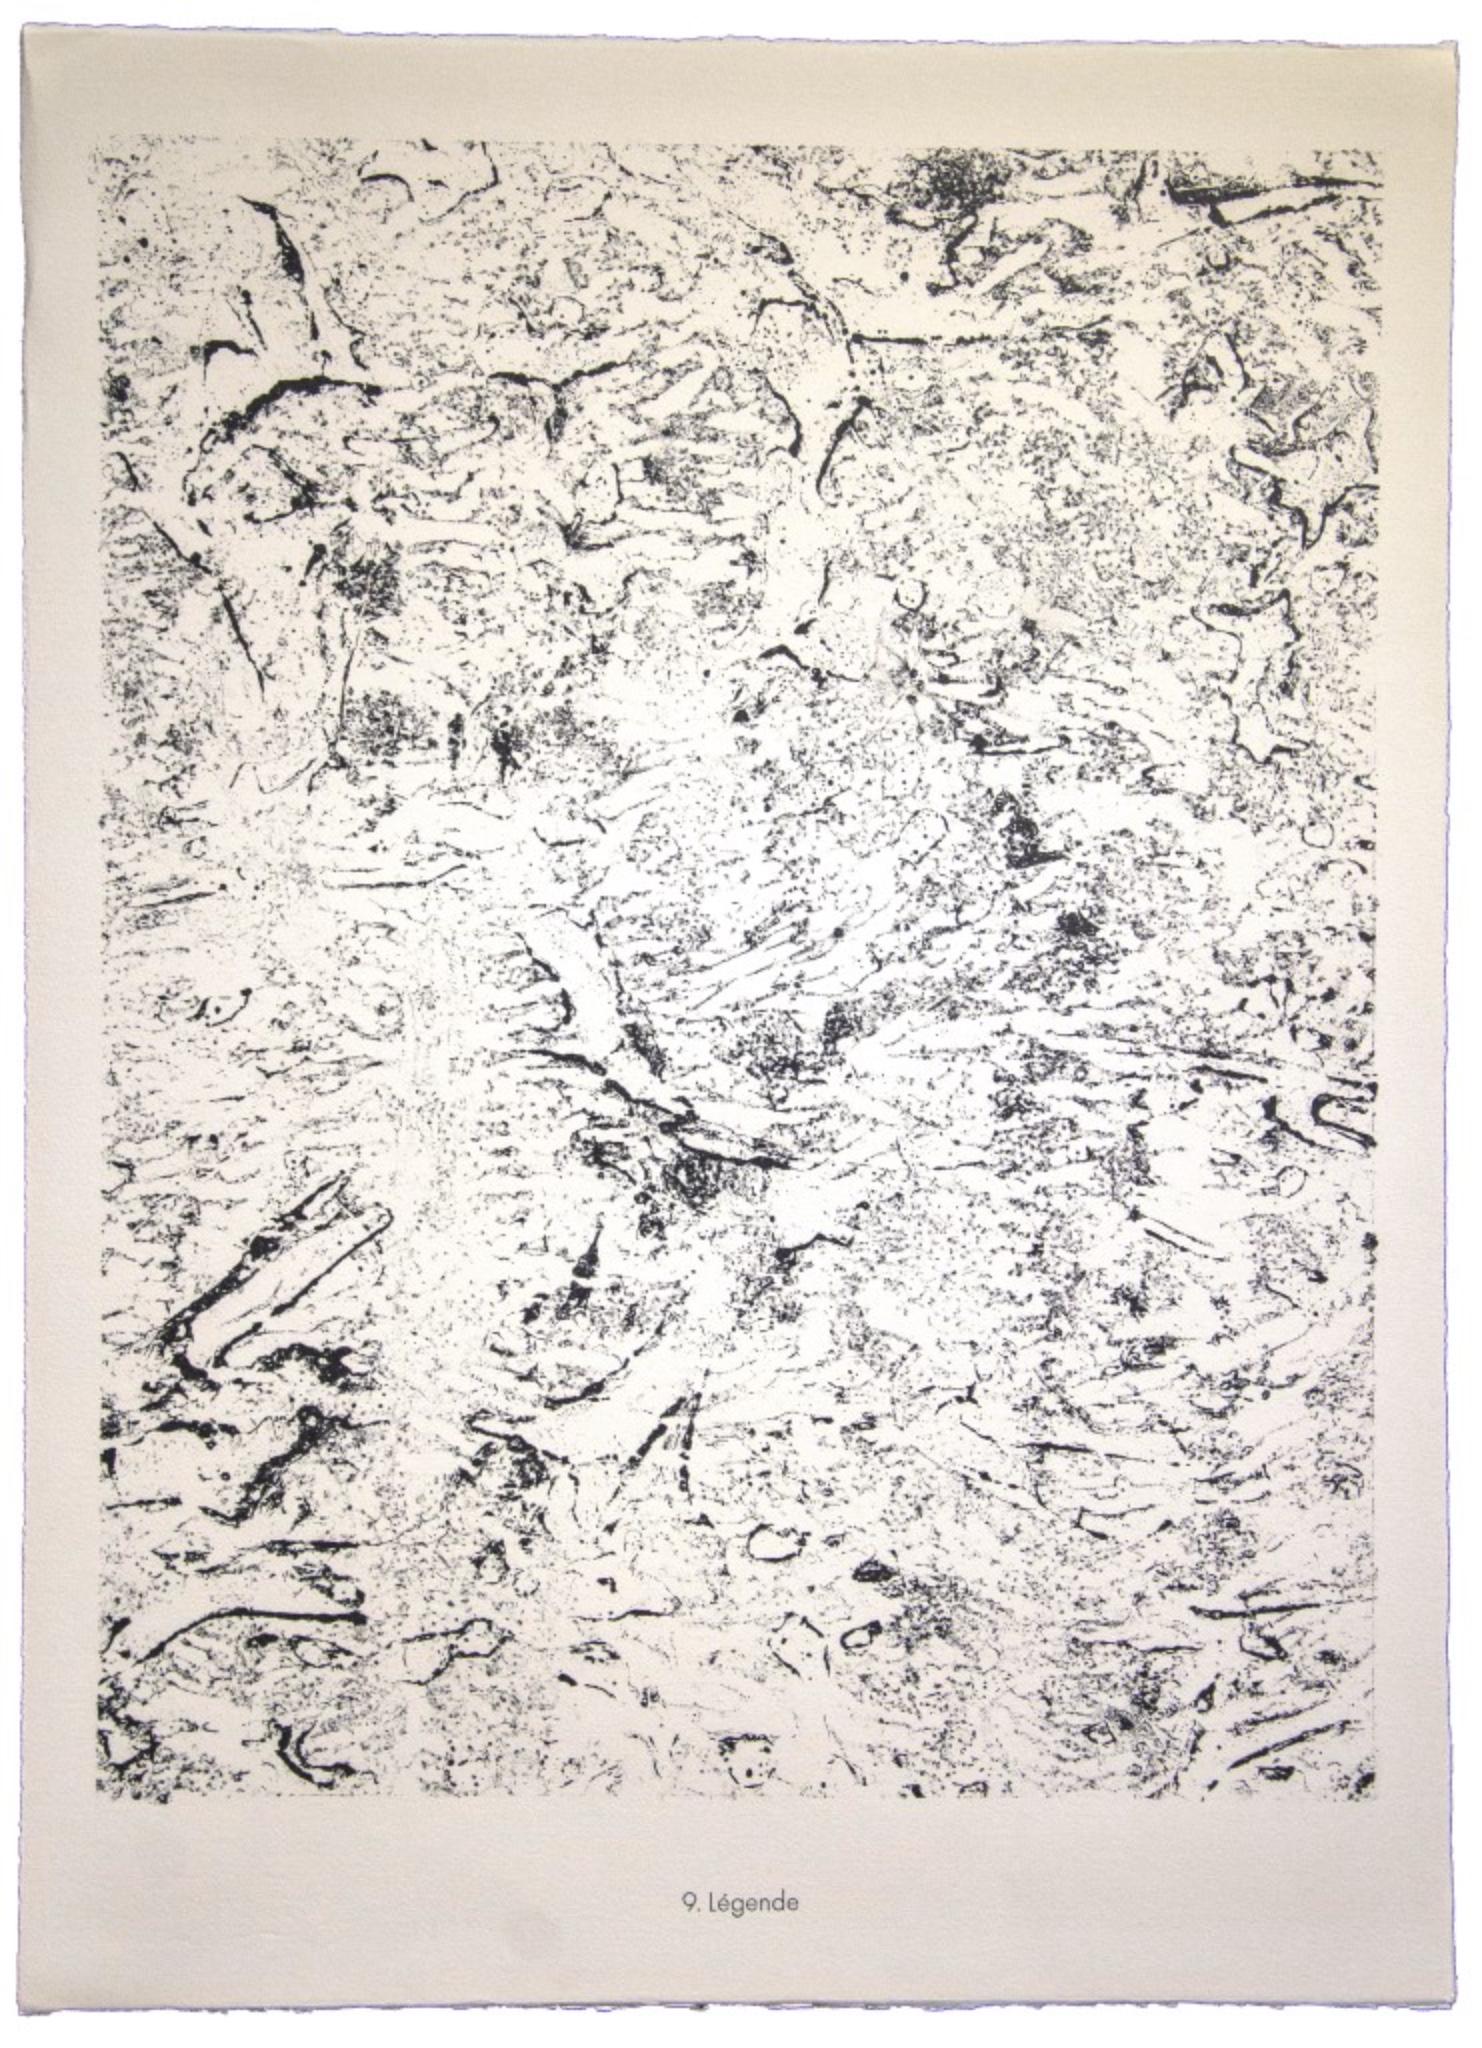 Legende is an original lithograph on watermarked paper "Arc". Abstract composition by the French artist Jean Dubuffet. From the album of "Theatre du sol" (1953-1959). In excellent conditions.

Referements: Cat. Silkeborg n° 332/ Cat. S. Webel n°535.